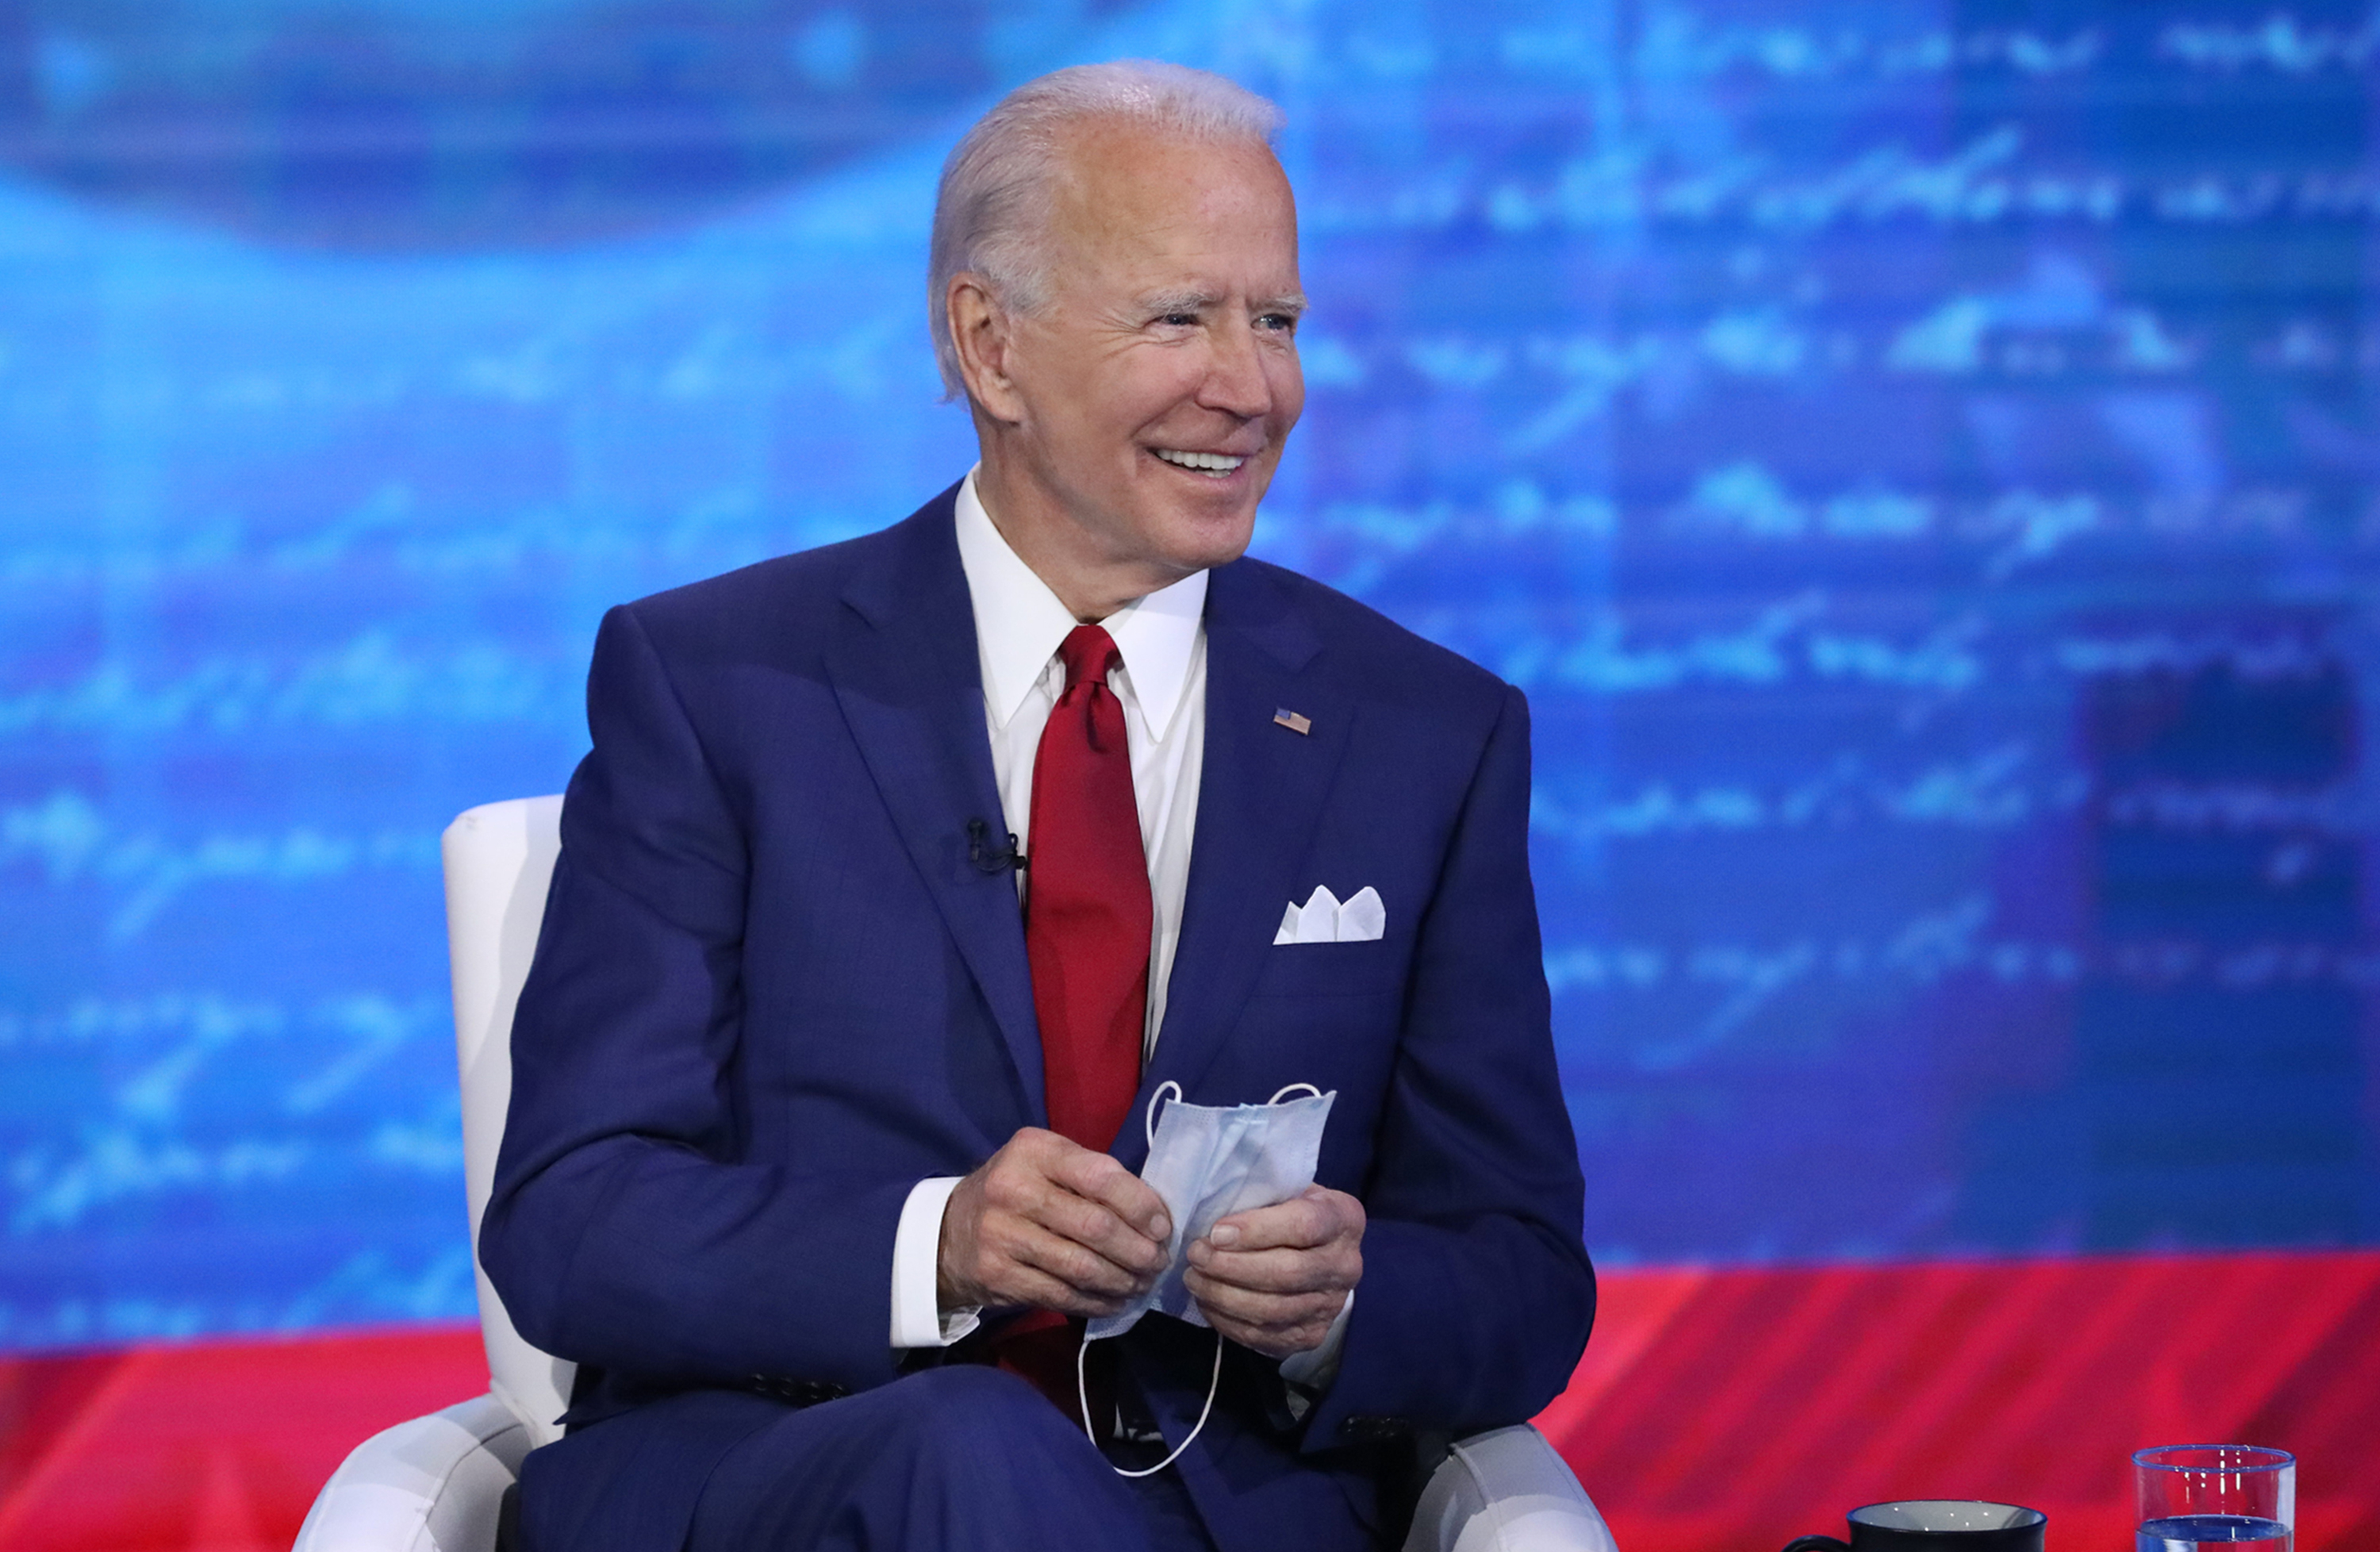 Democratic presidential nominee Joe Biden on Oct. 15, 2020 in Philadelphia, during ABC's "The Vice President and the People" (ABC via Getty Images—2020 American Broadcasting Companies, Inc.)